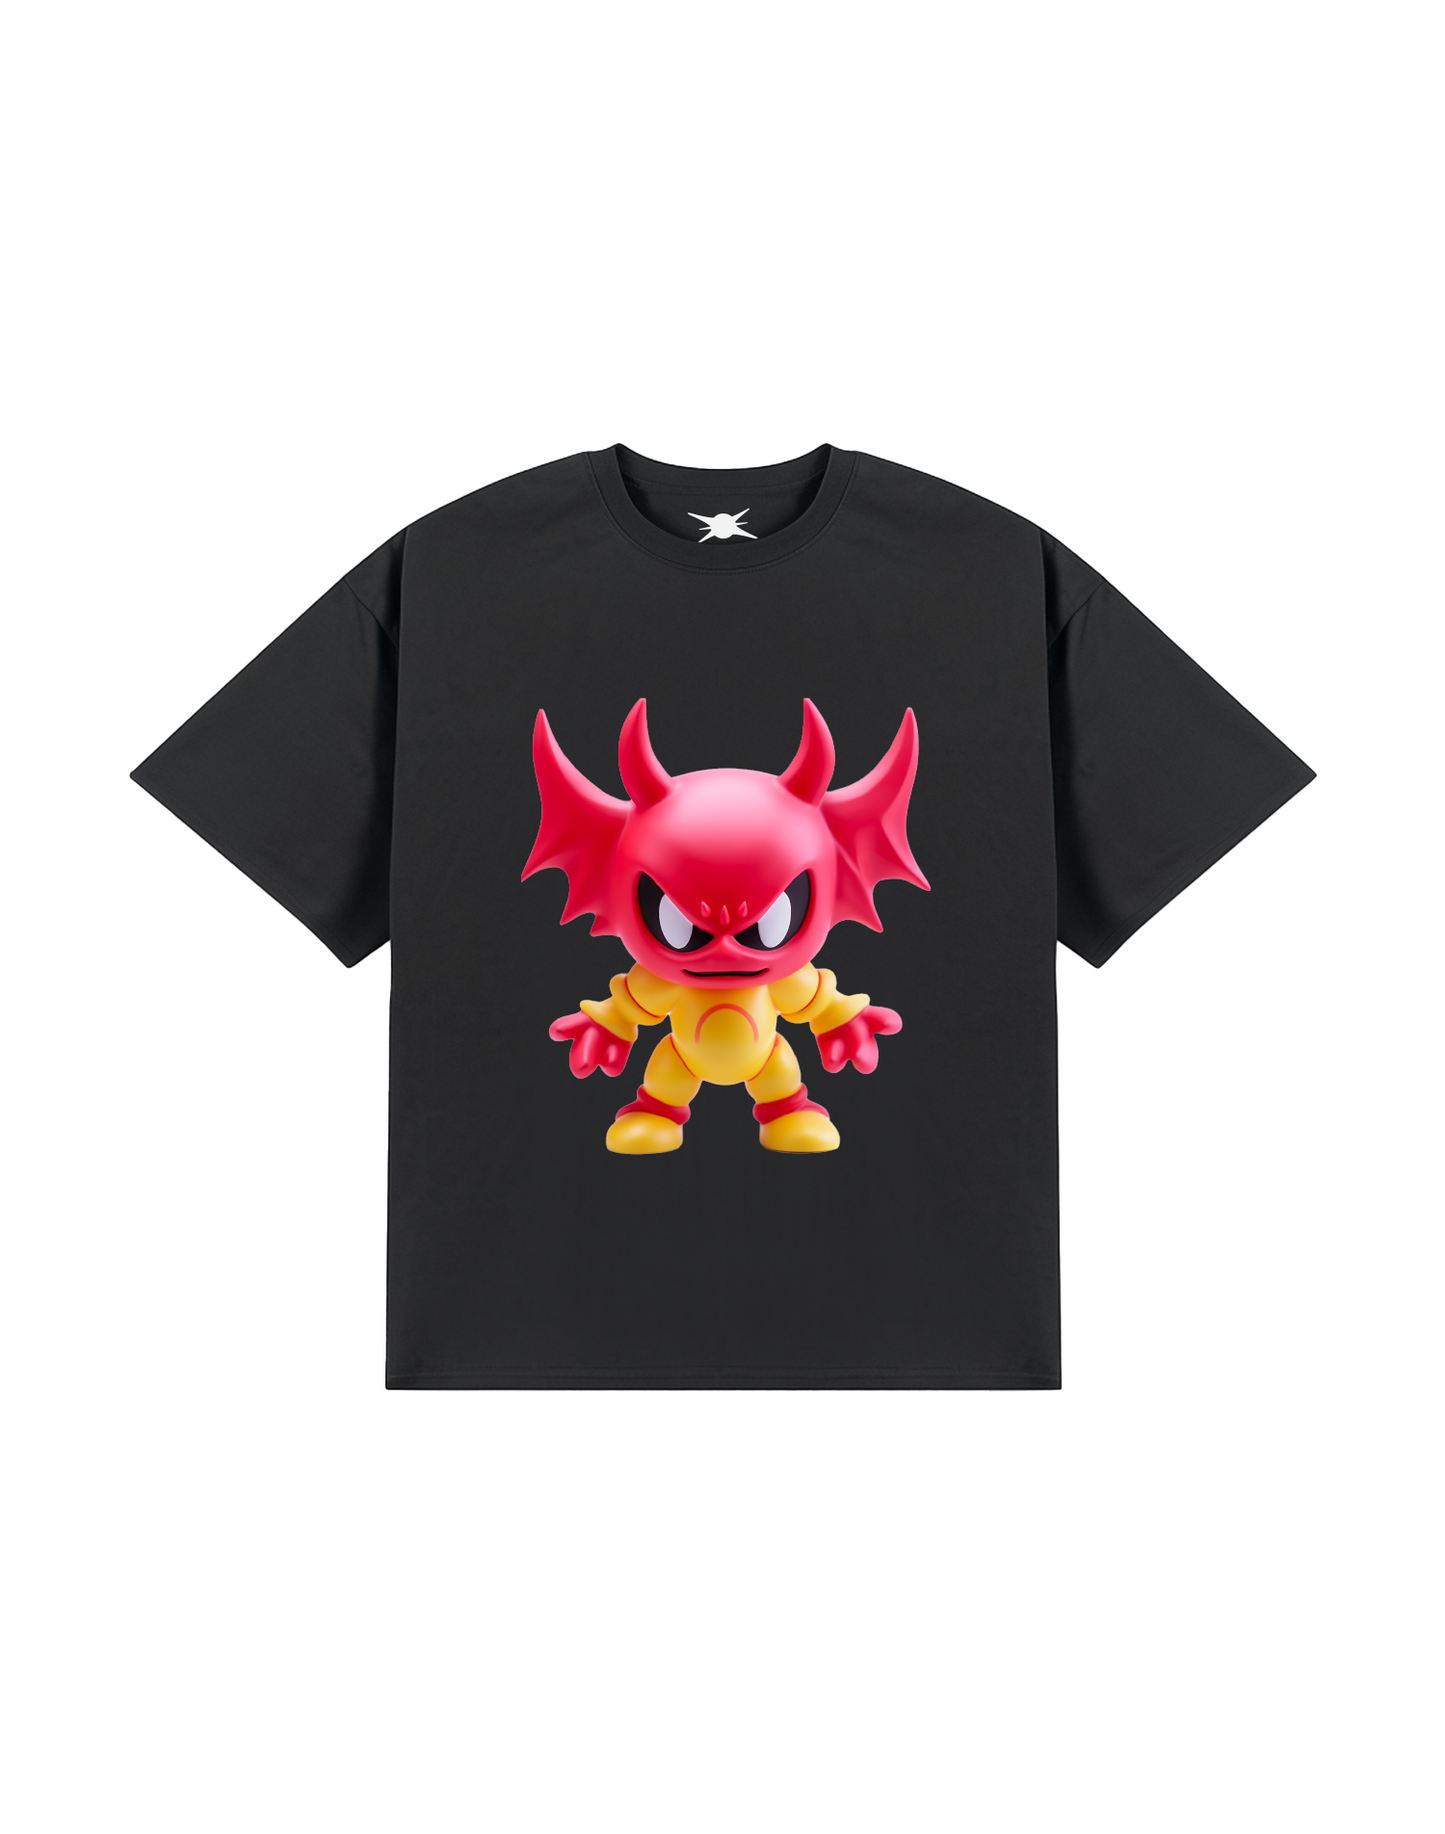 Demonition Tee with striking demon graphic design from Supersede Official